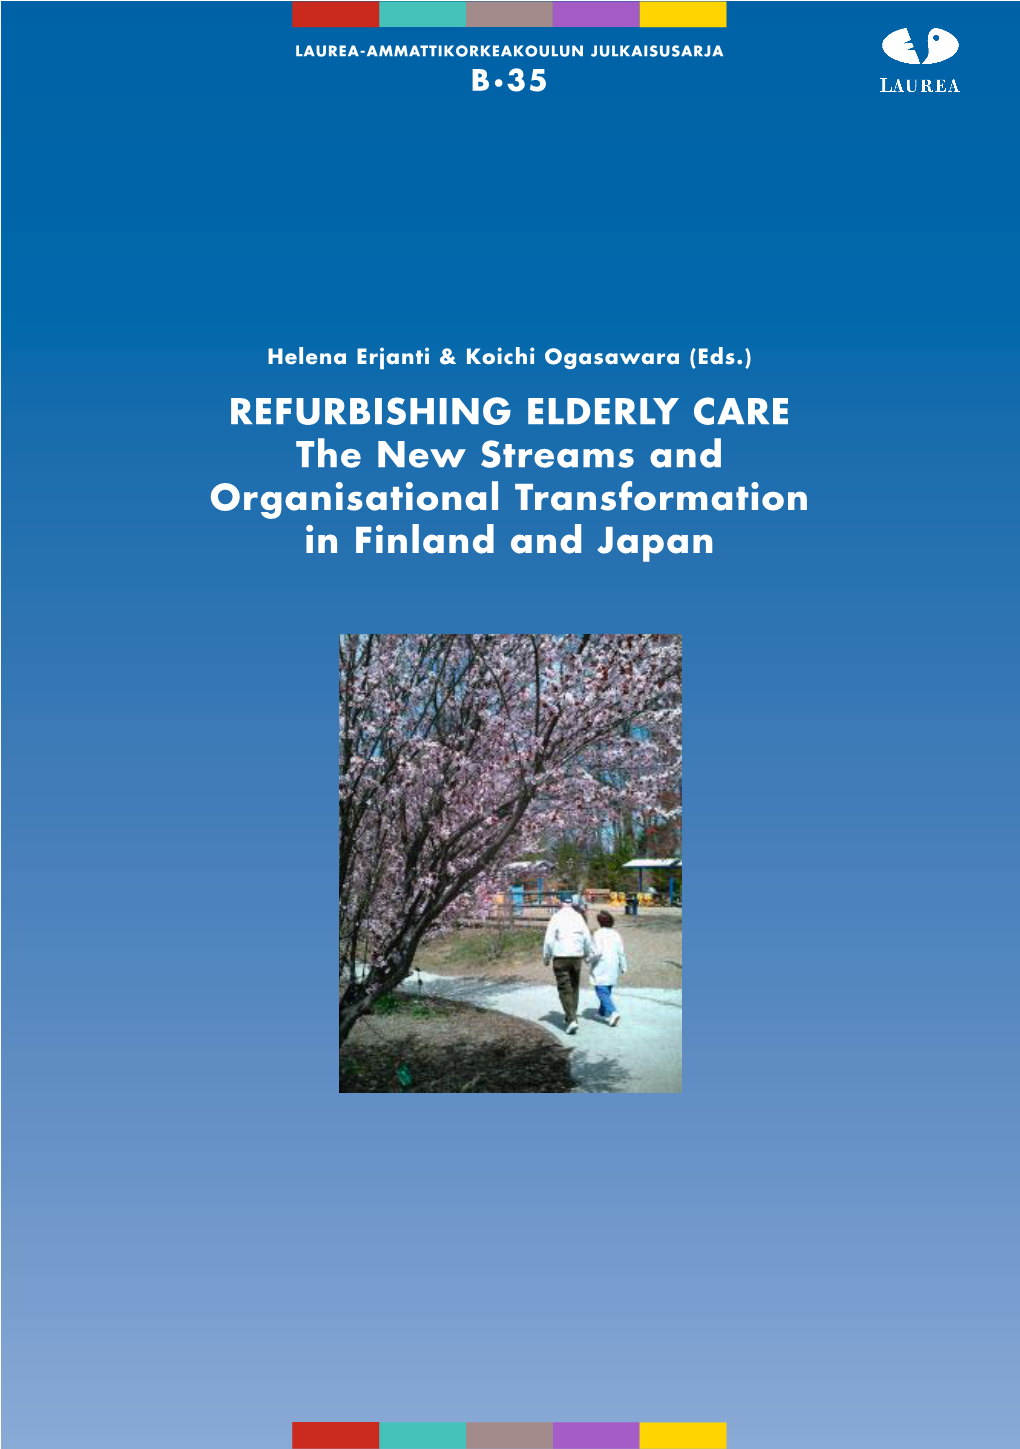 REFURBISHING ELDERLY CARE the New Streams and Organisational Transformation in Finland and Japan